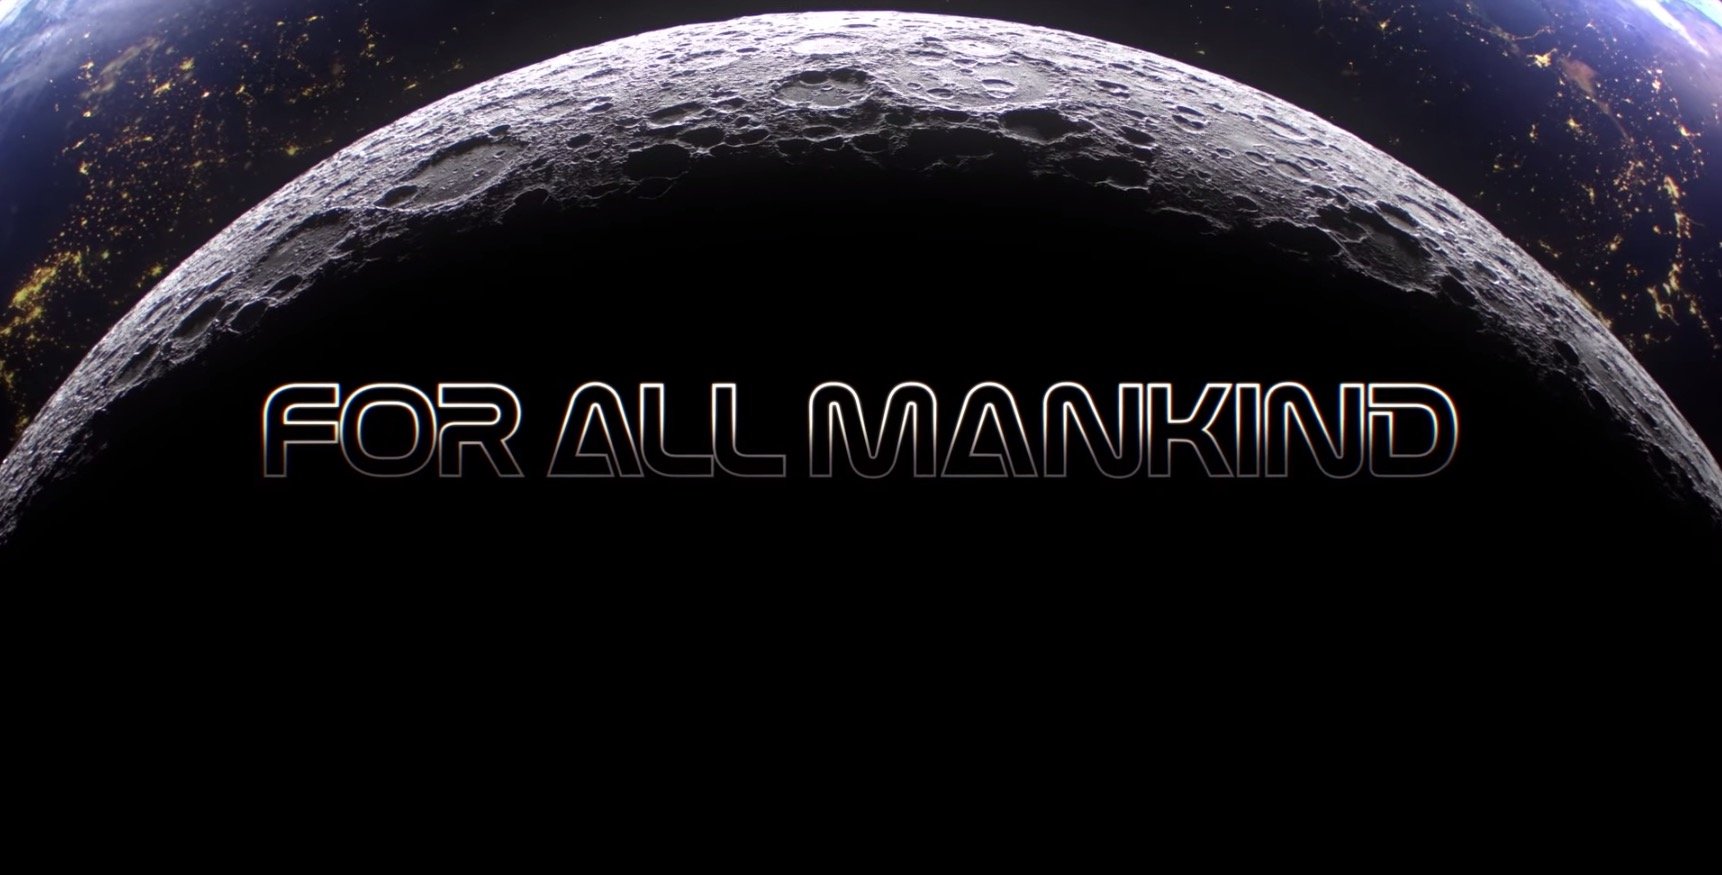 For All Mankind logo on the moon